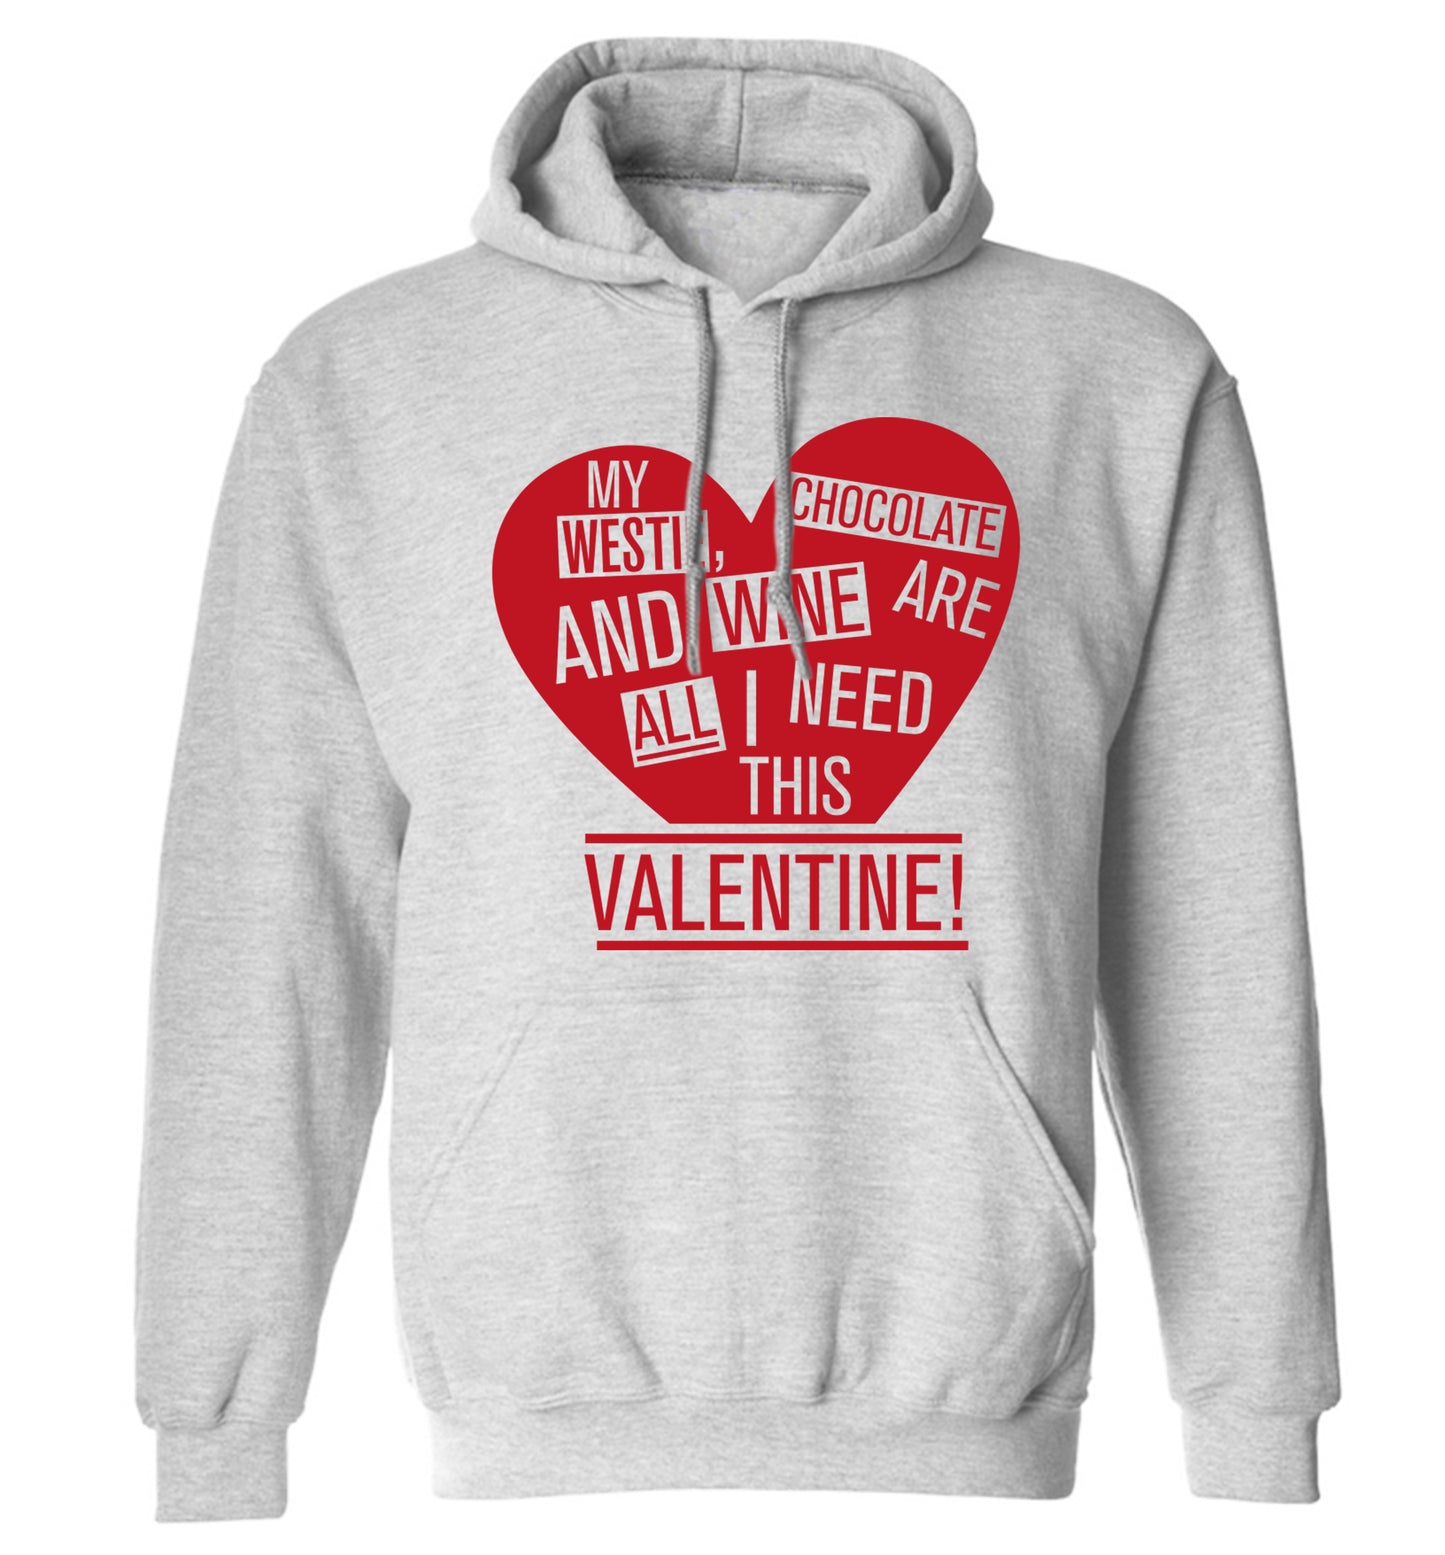 My westie, chocolate and wine are all I need this valentine! adults unisex grey hoodie 2XL